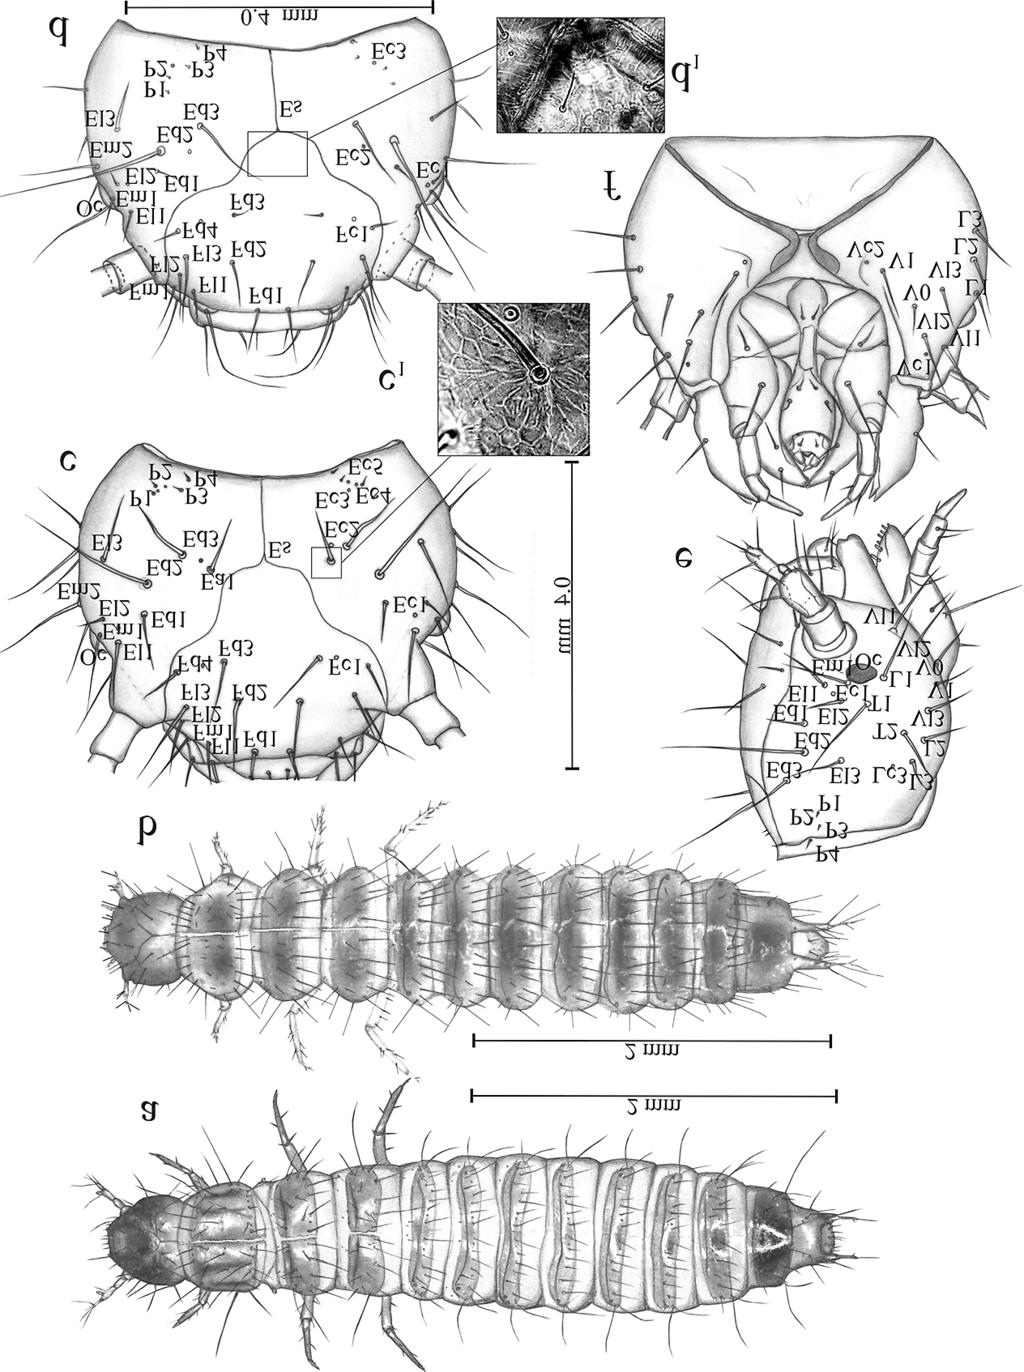 Fig 1. Mature larva of Haploglossa picipennis (a,c,e,f)andh. nidicola (b,d). a,b.general view. c f. Head, in dorsal view (c, d) with microstructure (c 1,d 1 ), lateral view (e) and ventral view (f).